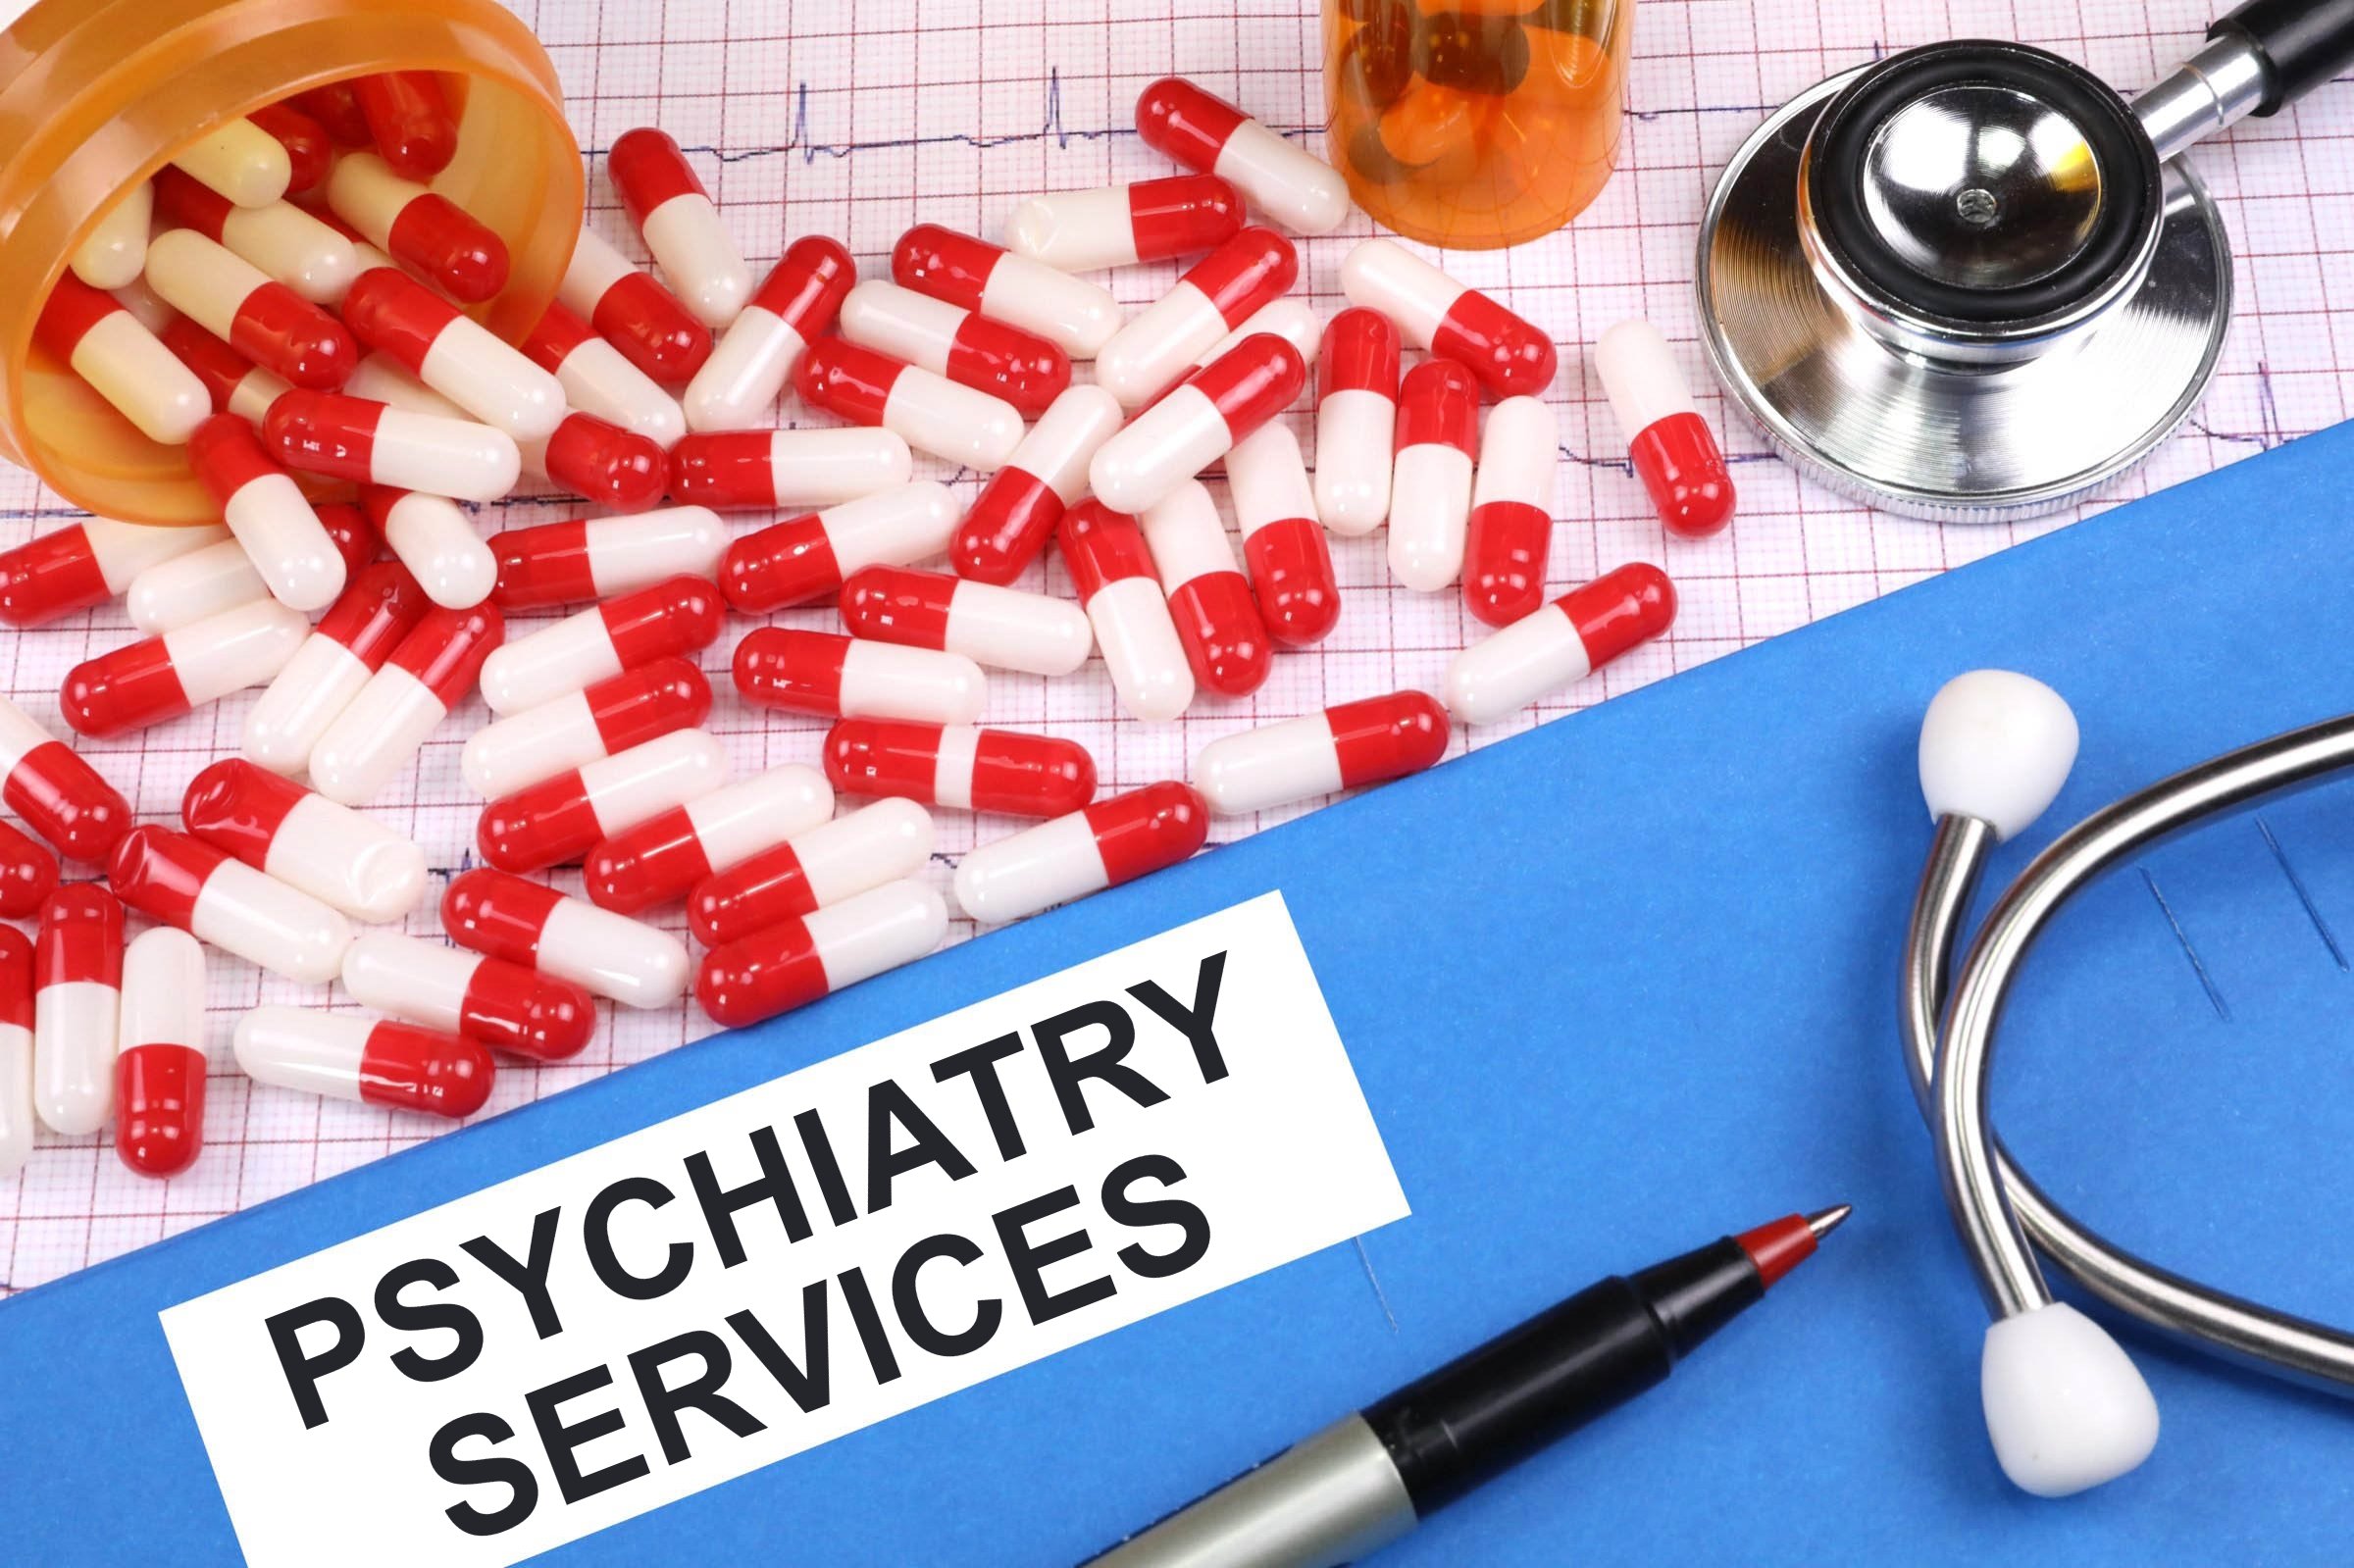 Psychiatry Services - Free of Charge Creative Commons Medical 5 image